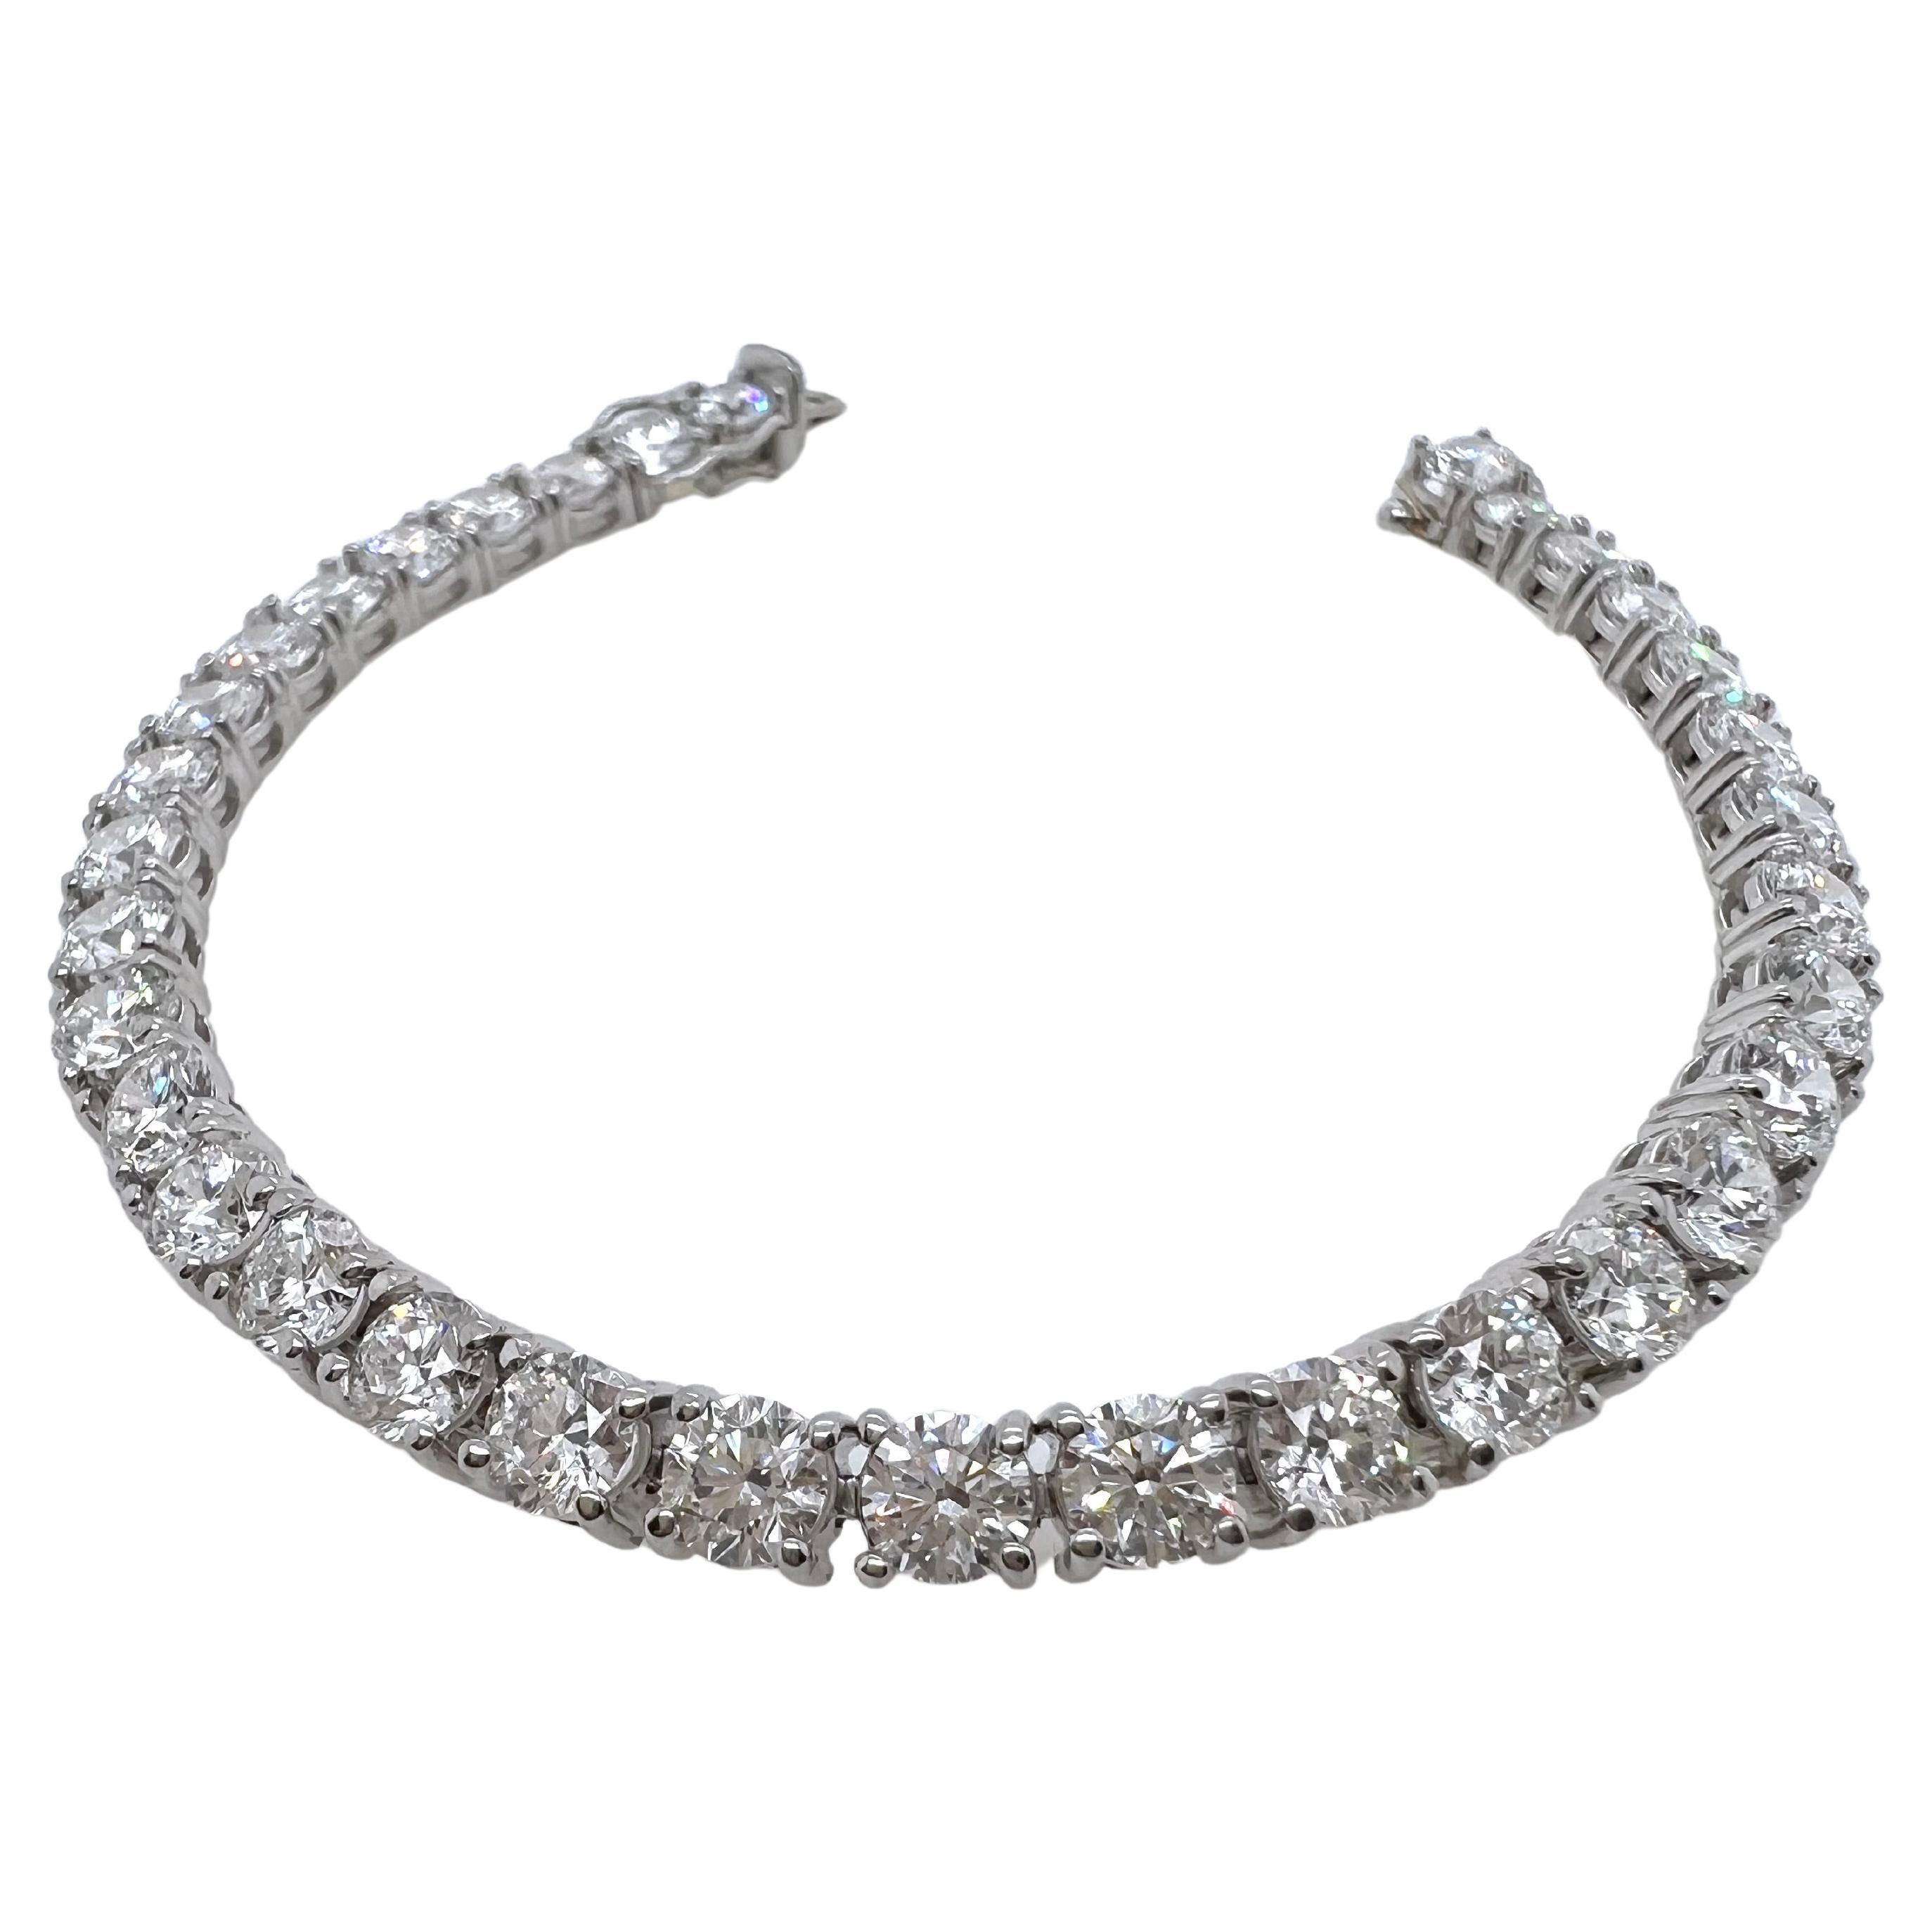 This diamond tennis bracelet is a special heirloom quality piece.  Every diamond is GIA certified, matched perfectly.  Each diamond is 0.40 ct, D color, VS2 clarity, no fluorescence and excellent in cut, polish, and symmetry.  The handmade platinum